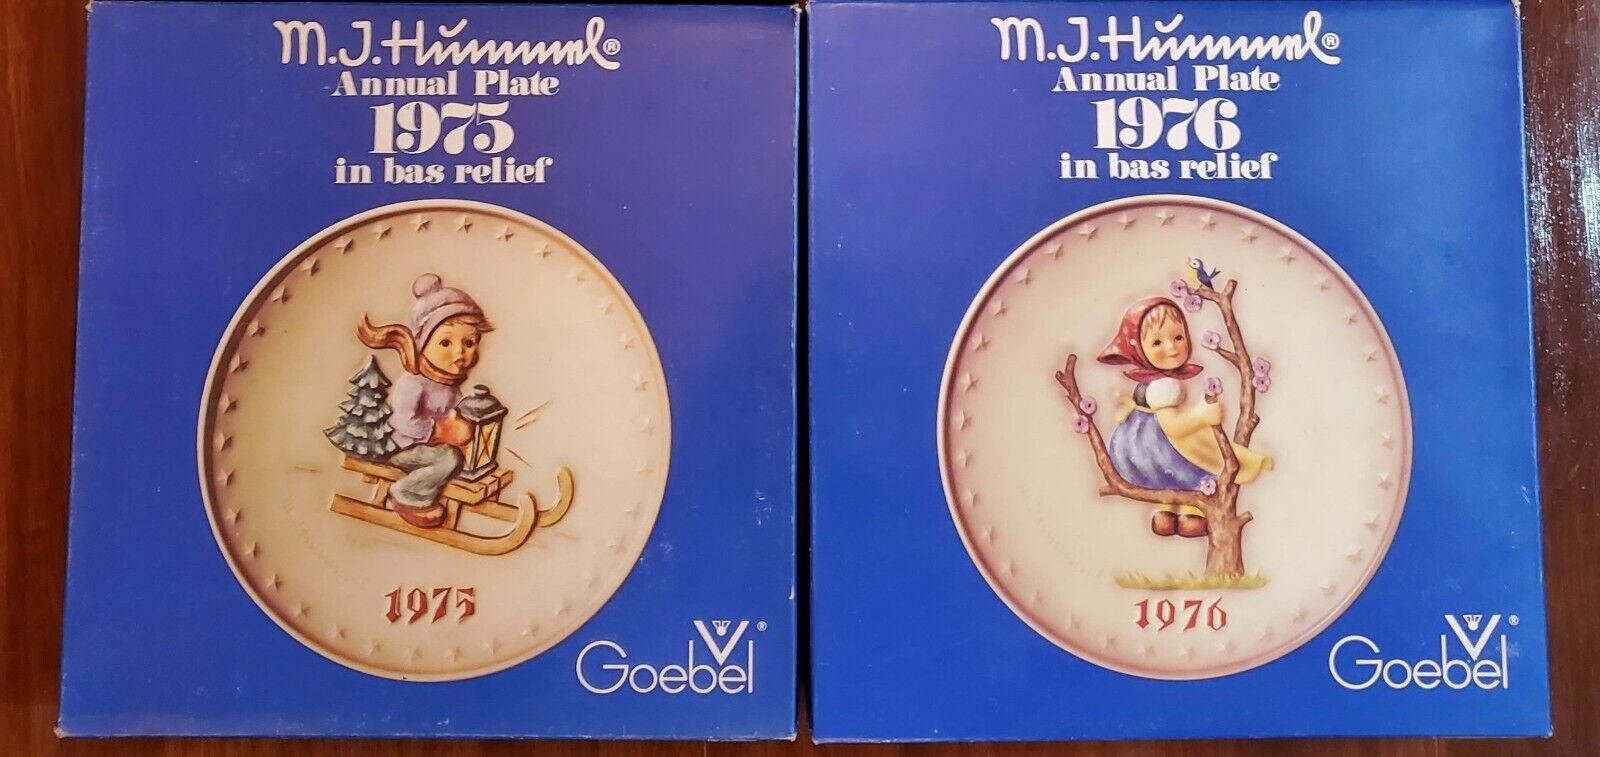 Vintage 1975-76 Annual Holiday Collector Plates Set of 2 by MJ Hummel Goebel